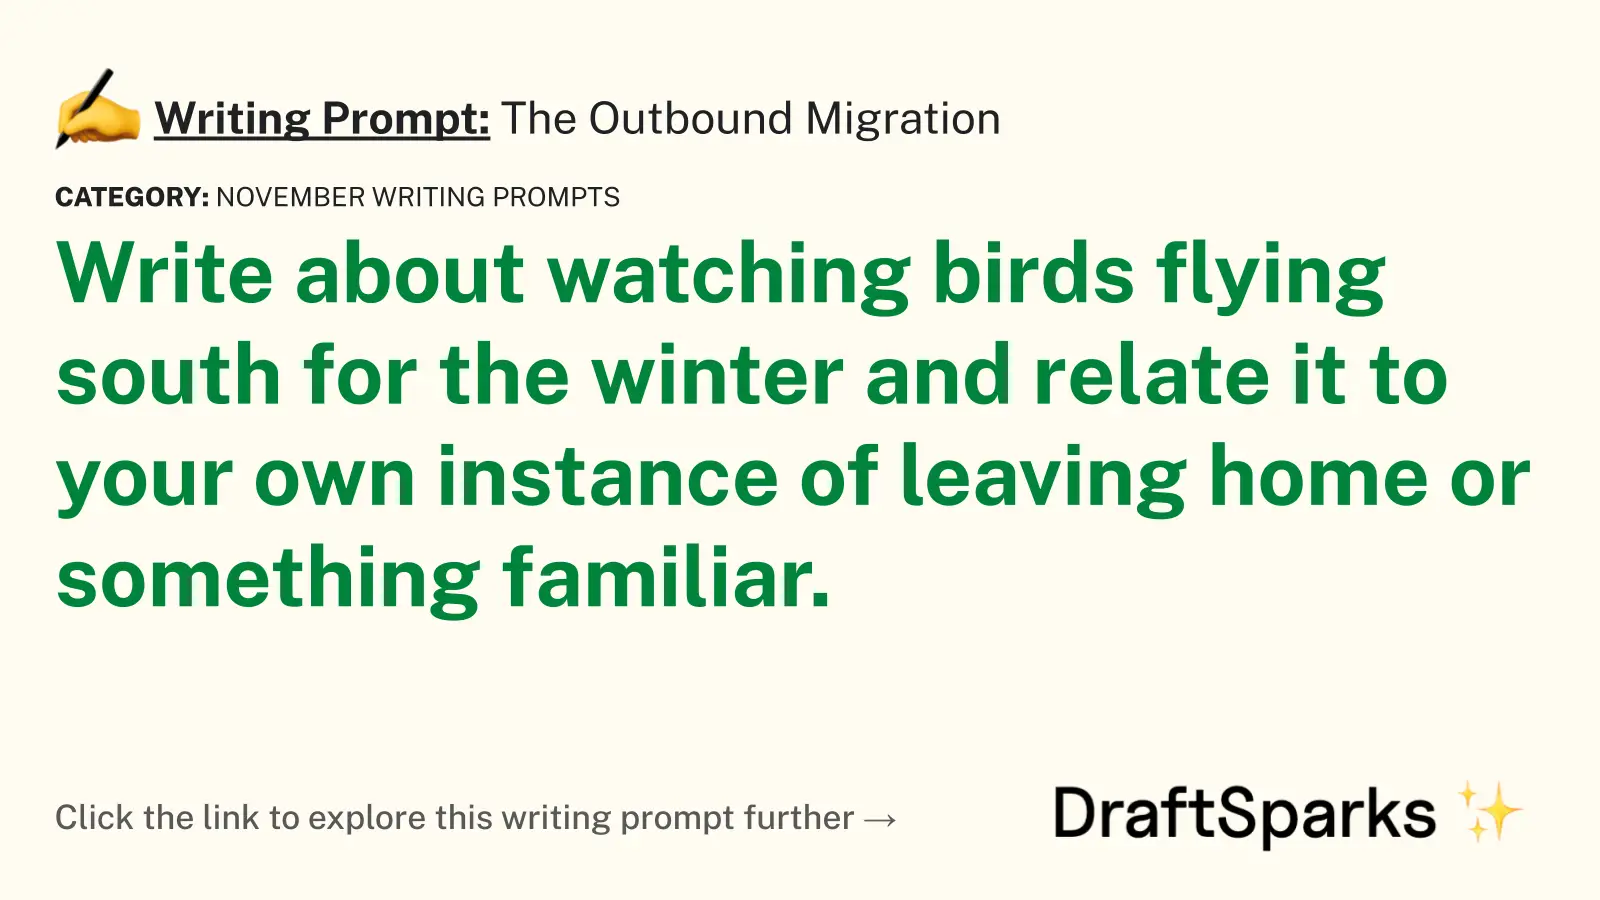 The Outbound Migration